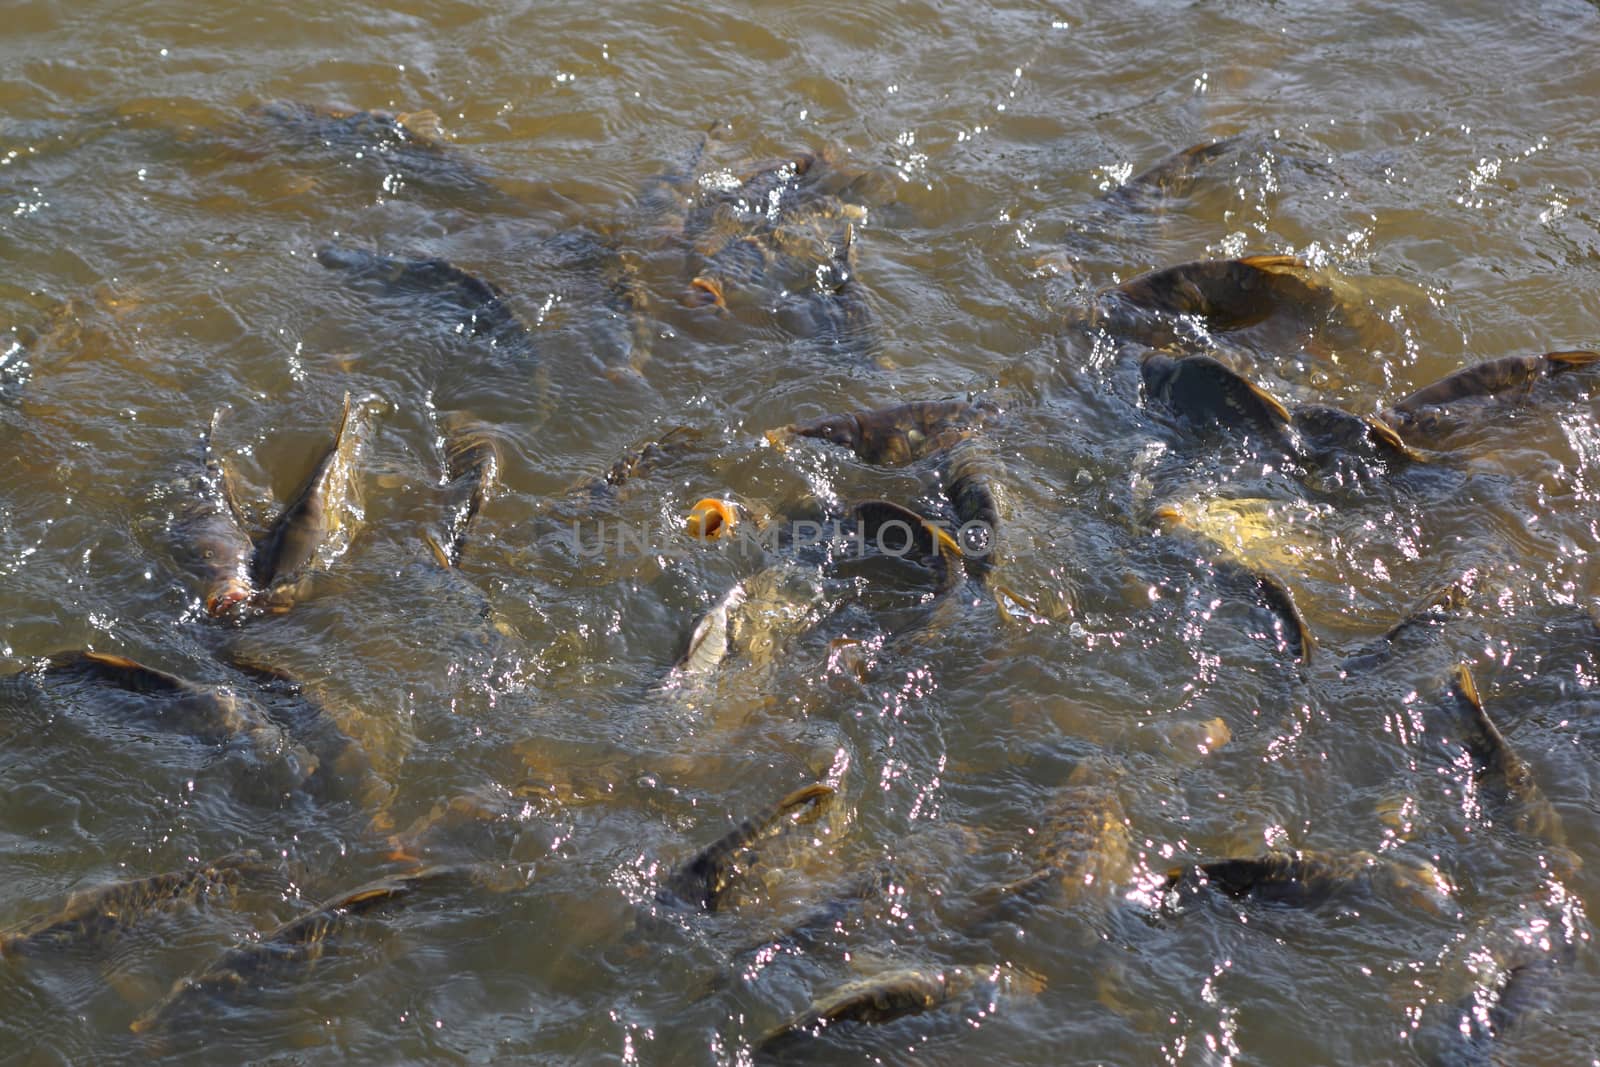 Common carps in a pond